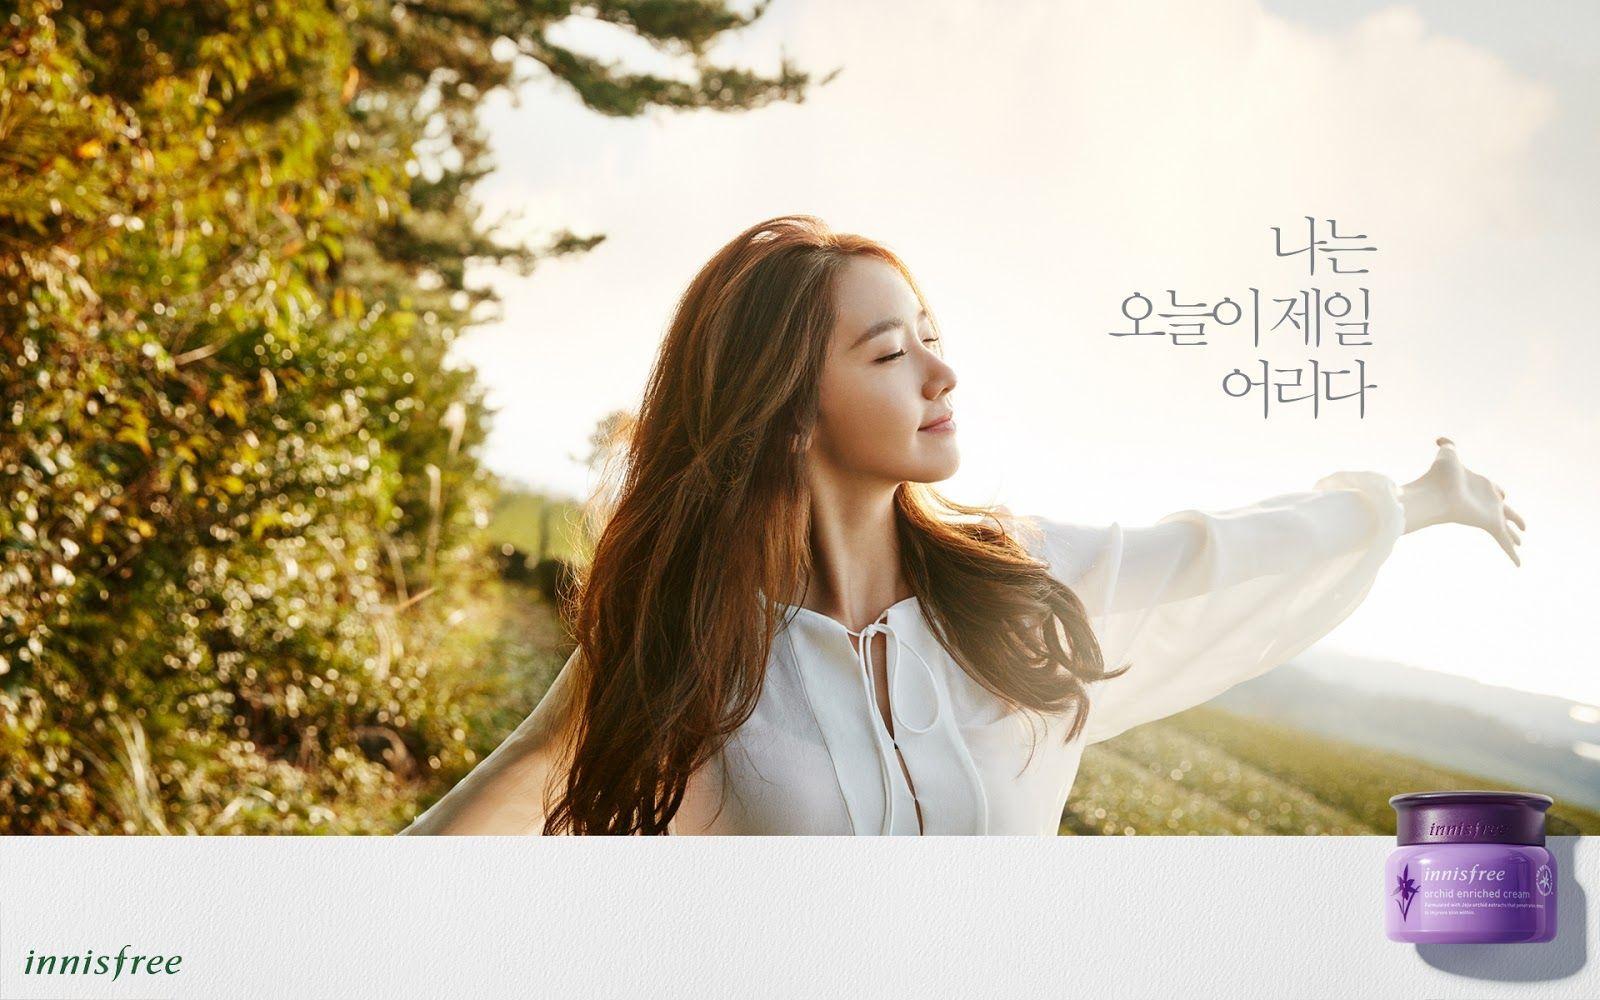 Yoona innisfree 「ORCHID ENRICHED CREAM」 2016 Promotion Wallpaper